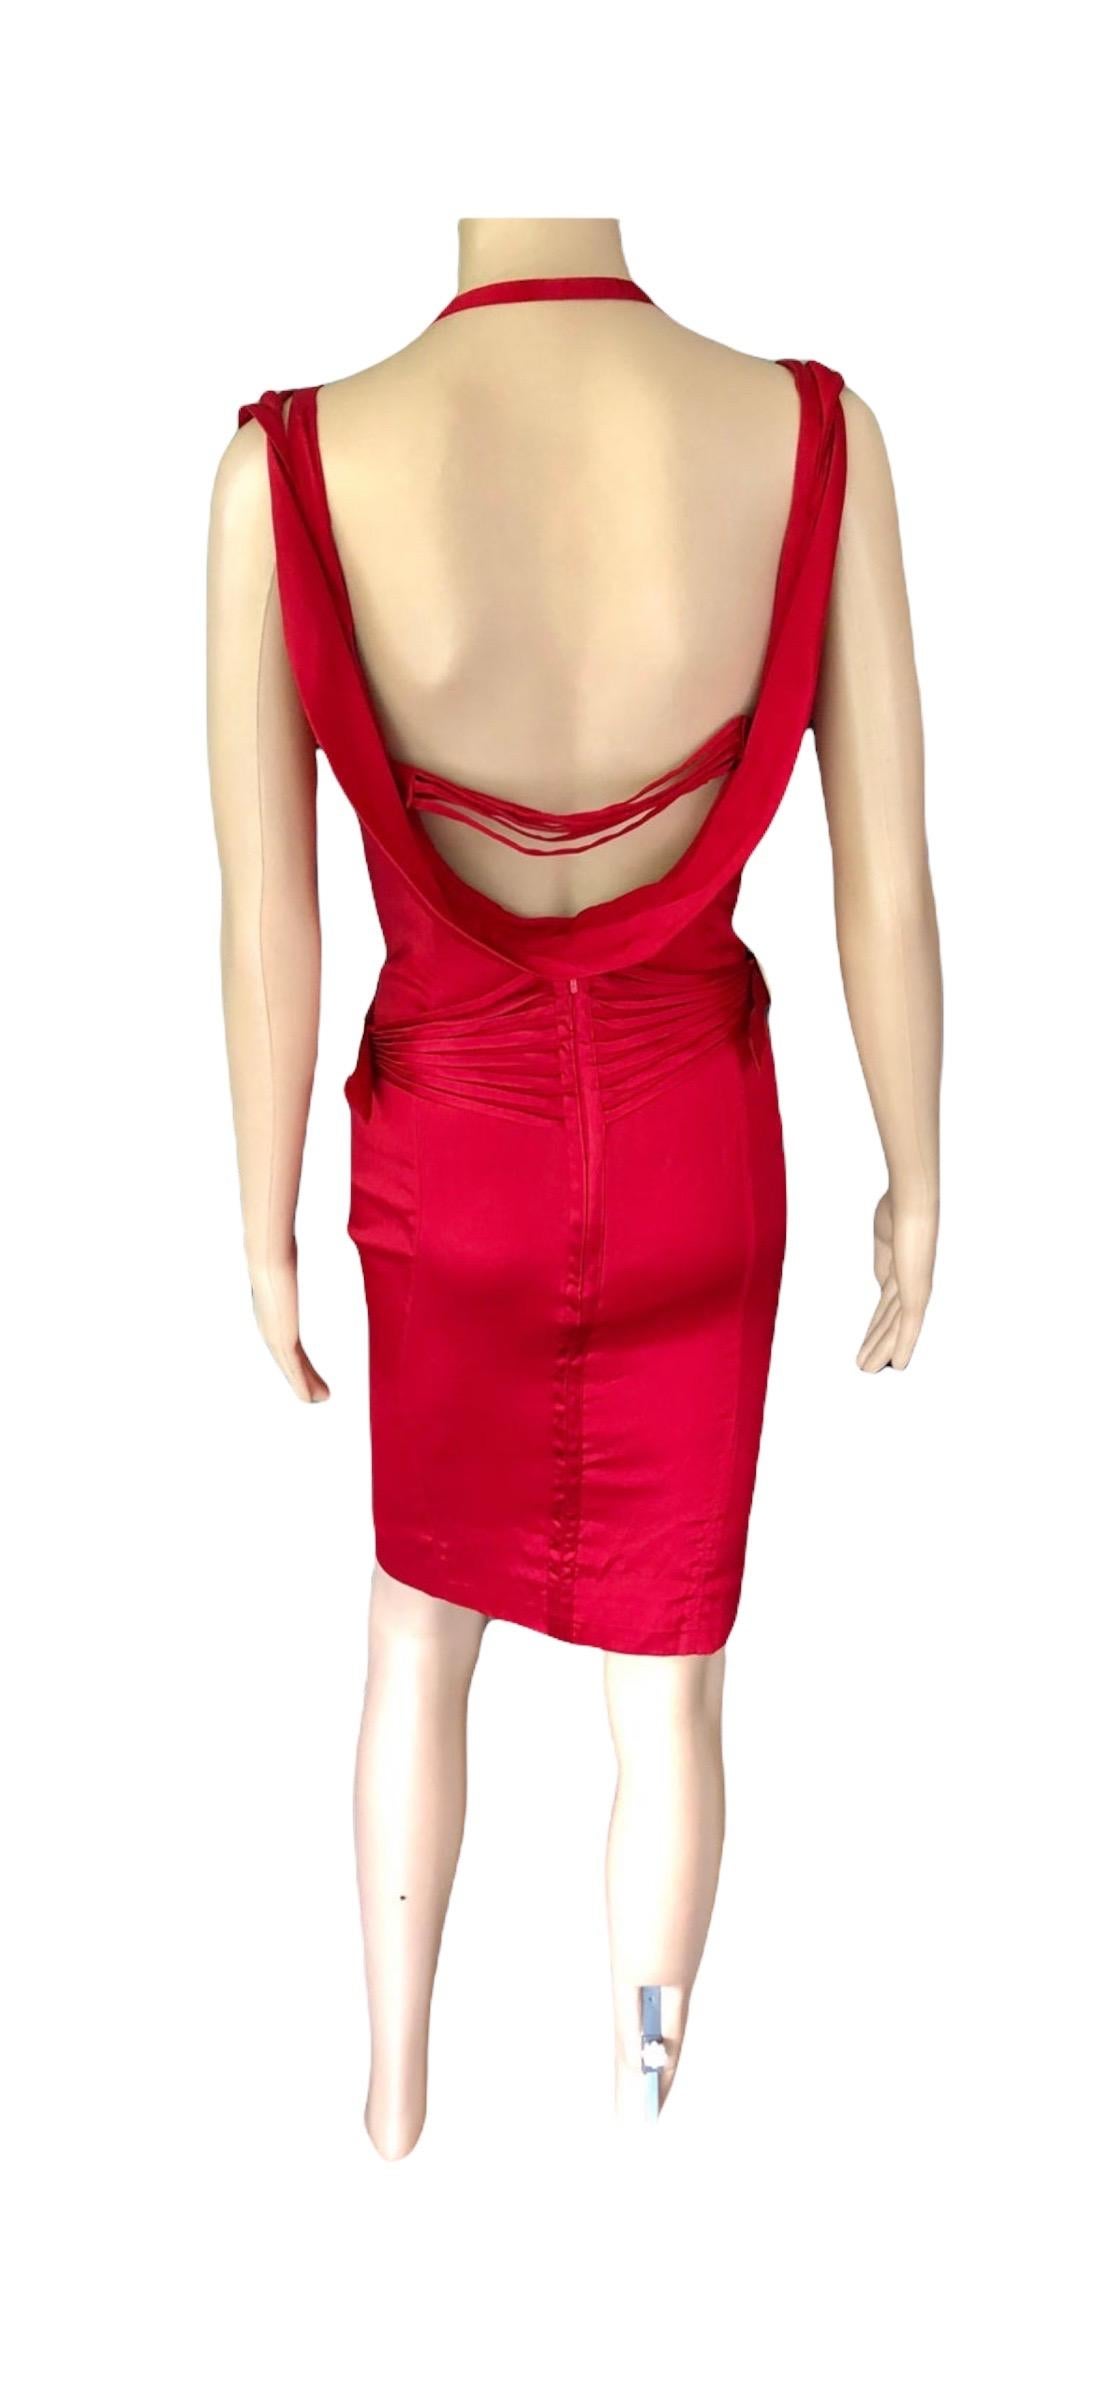 Tom Ford for Gucci F/W 2003 Runway Bustier Corset Silk Red Dress 11